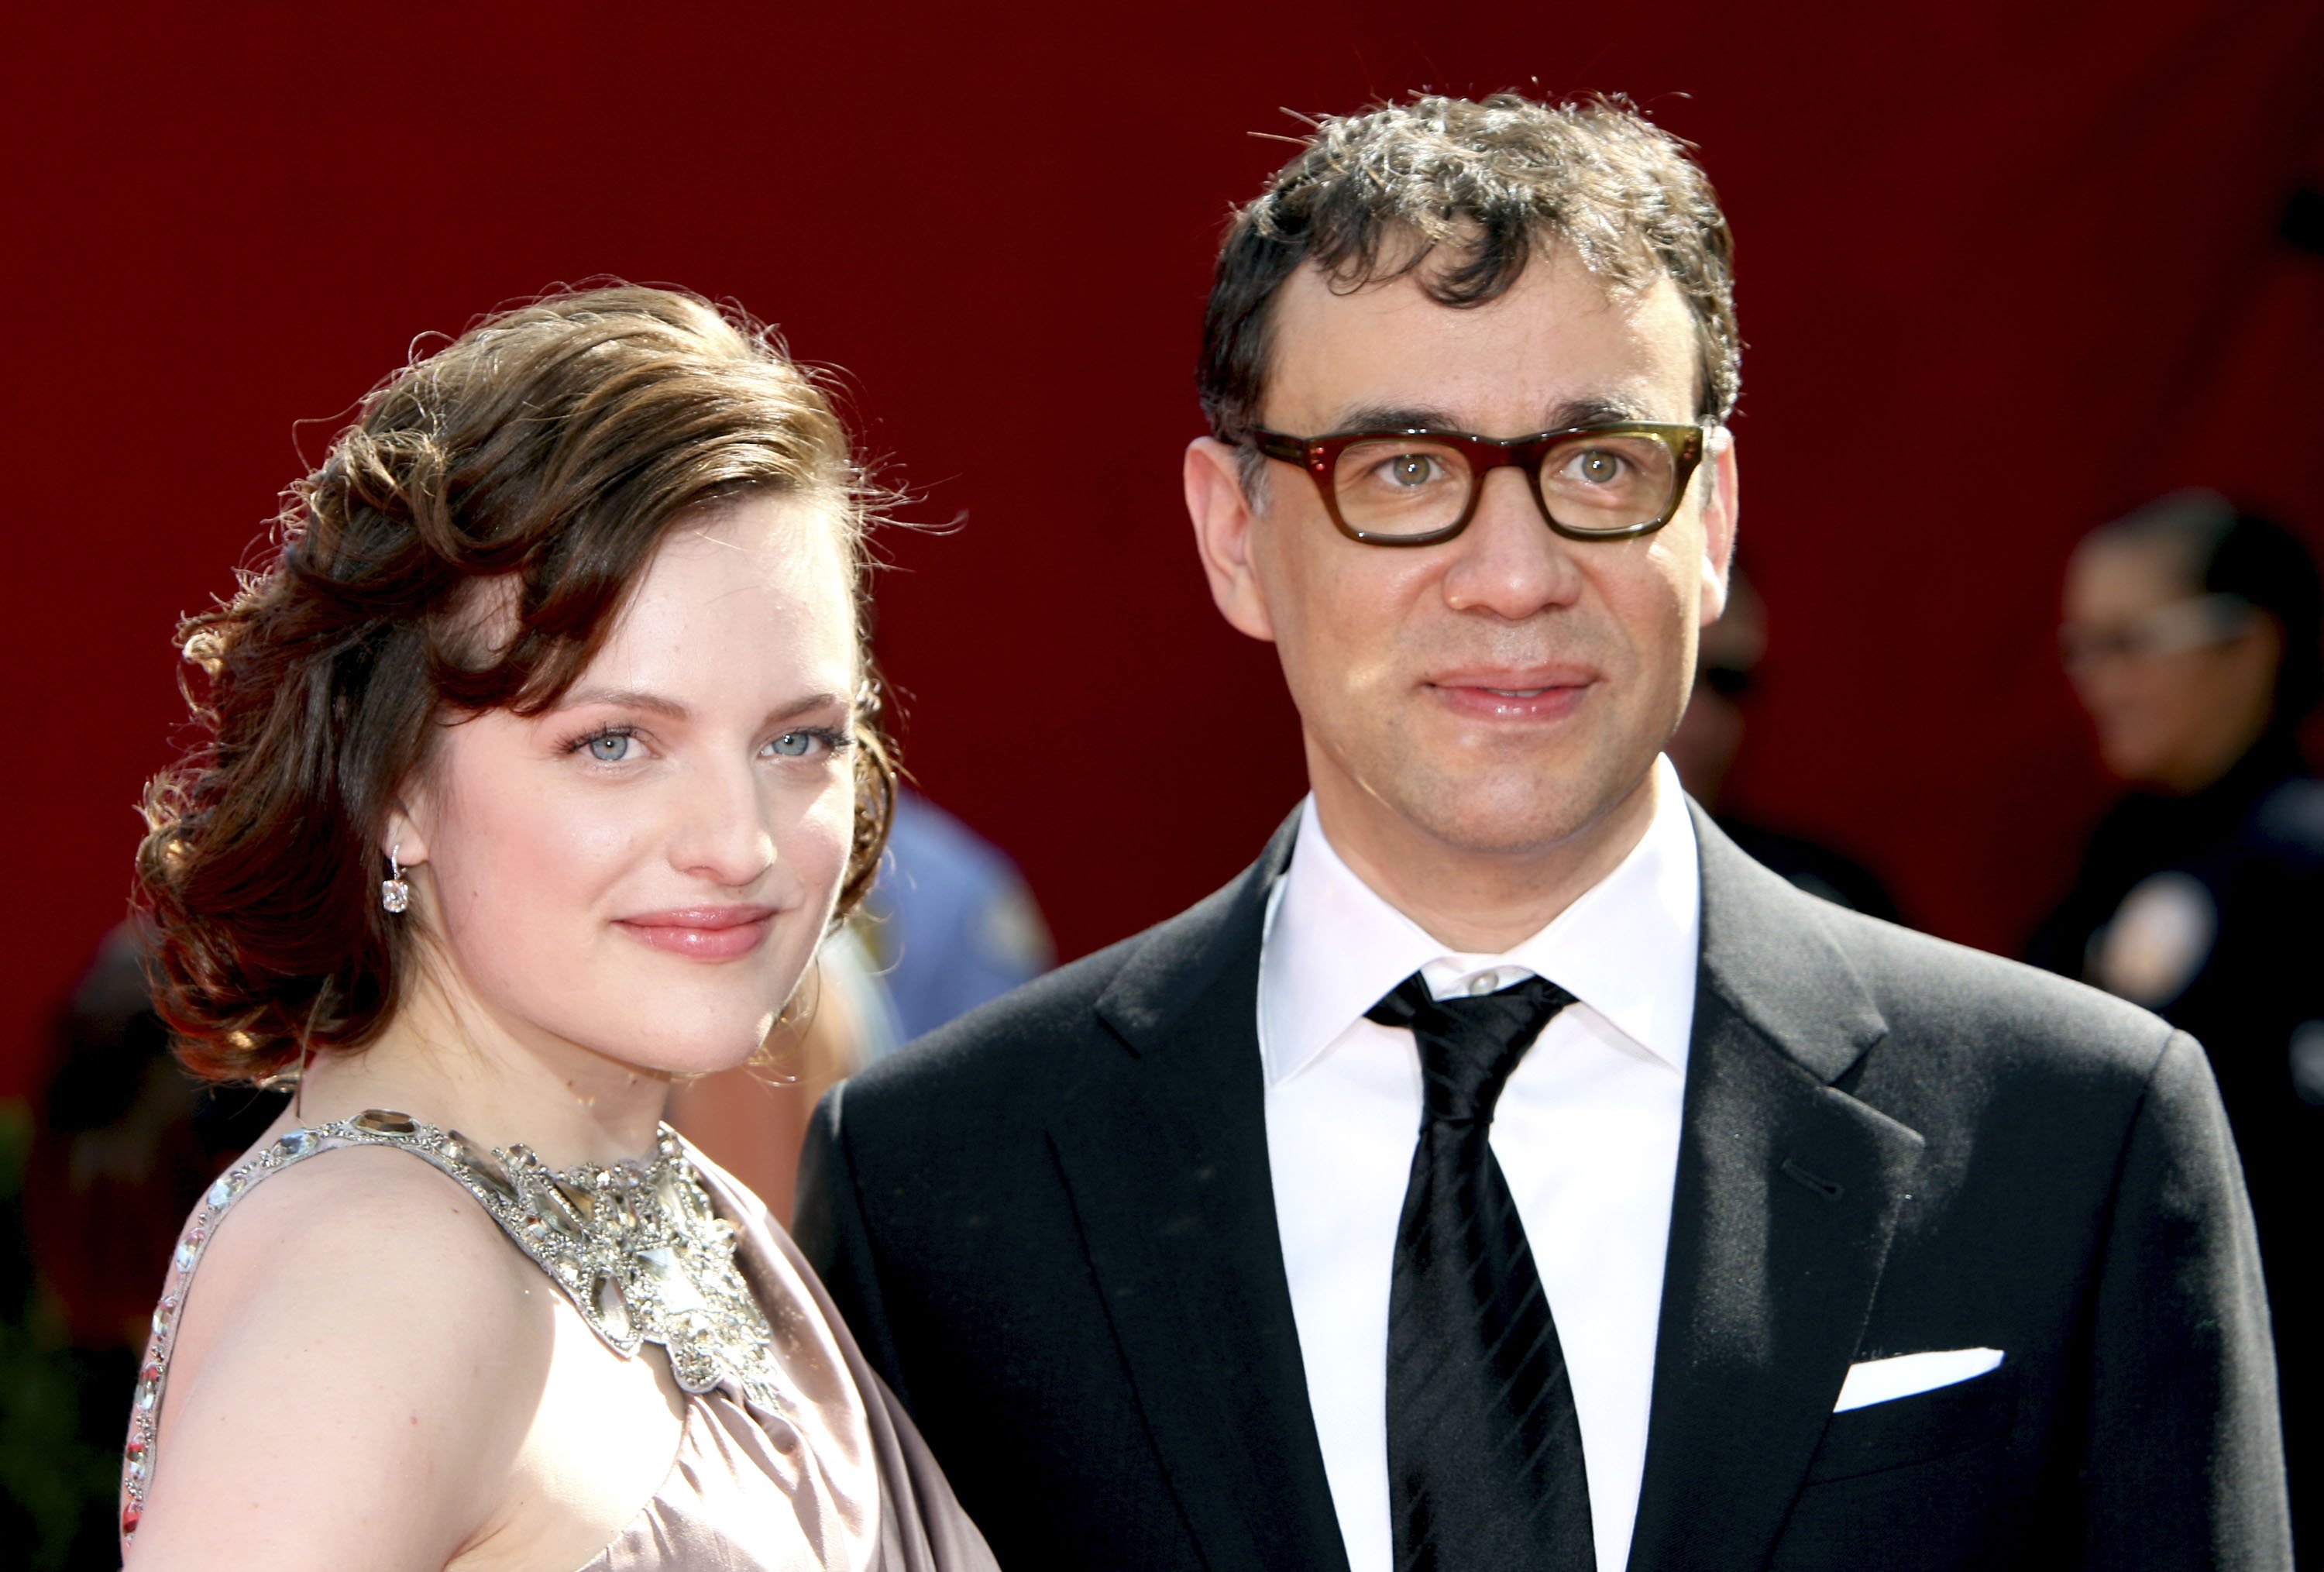 Elisabeth Moss and Fred Armisen at the Nokia Theatre on September 20, 2009, in Los Angeles, California. I Source: Getty Images